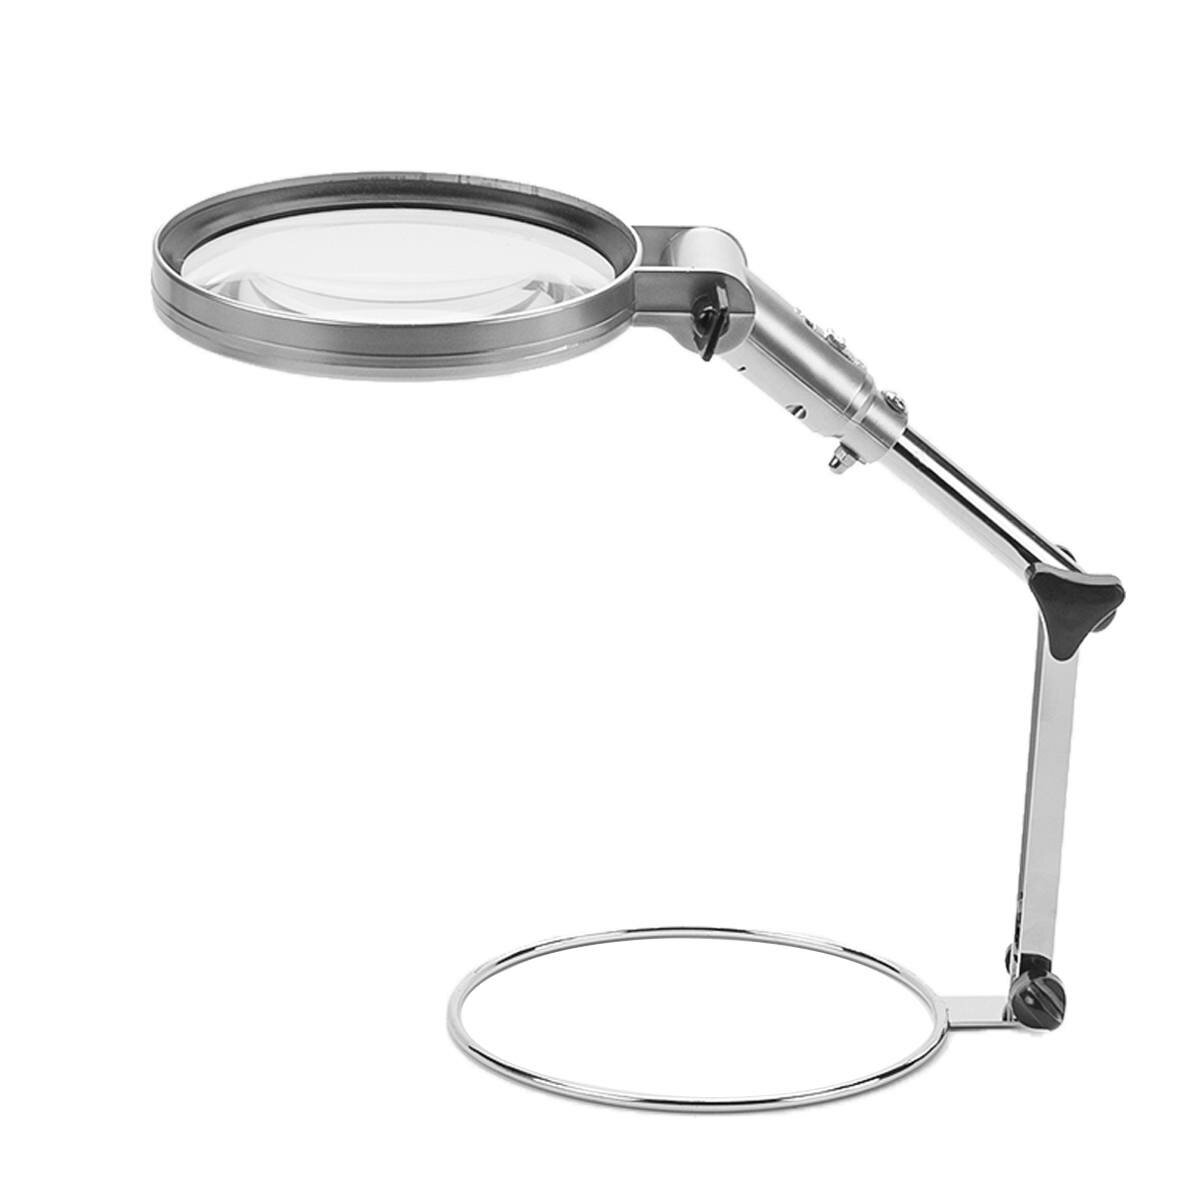 

2.5X 120mm Foldable Desktop Illuminated Magnifier Magnifying Glass Reading Loupe LED Lighted Lamp Optical Glass Lens Mag